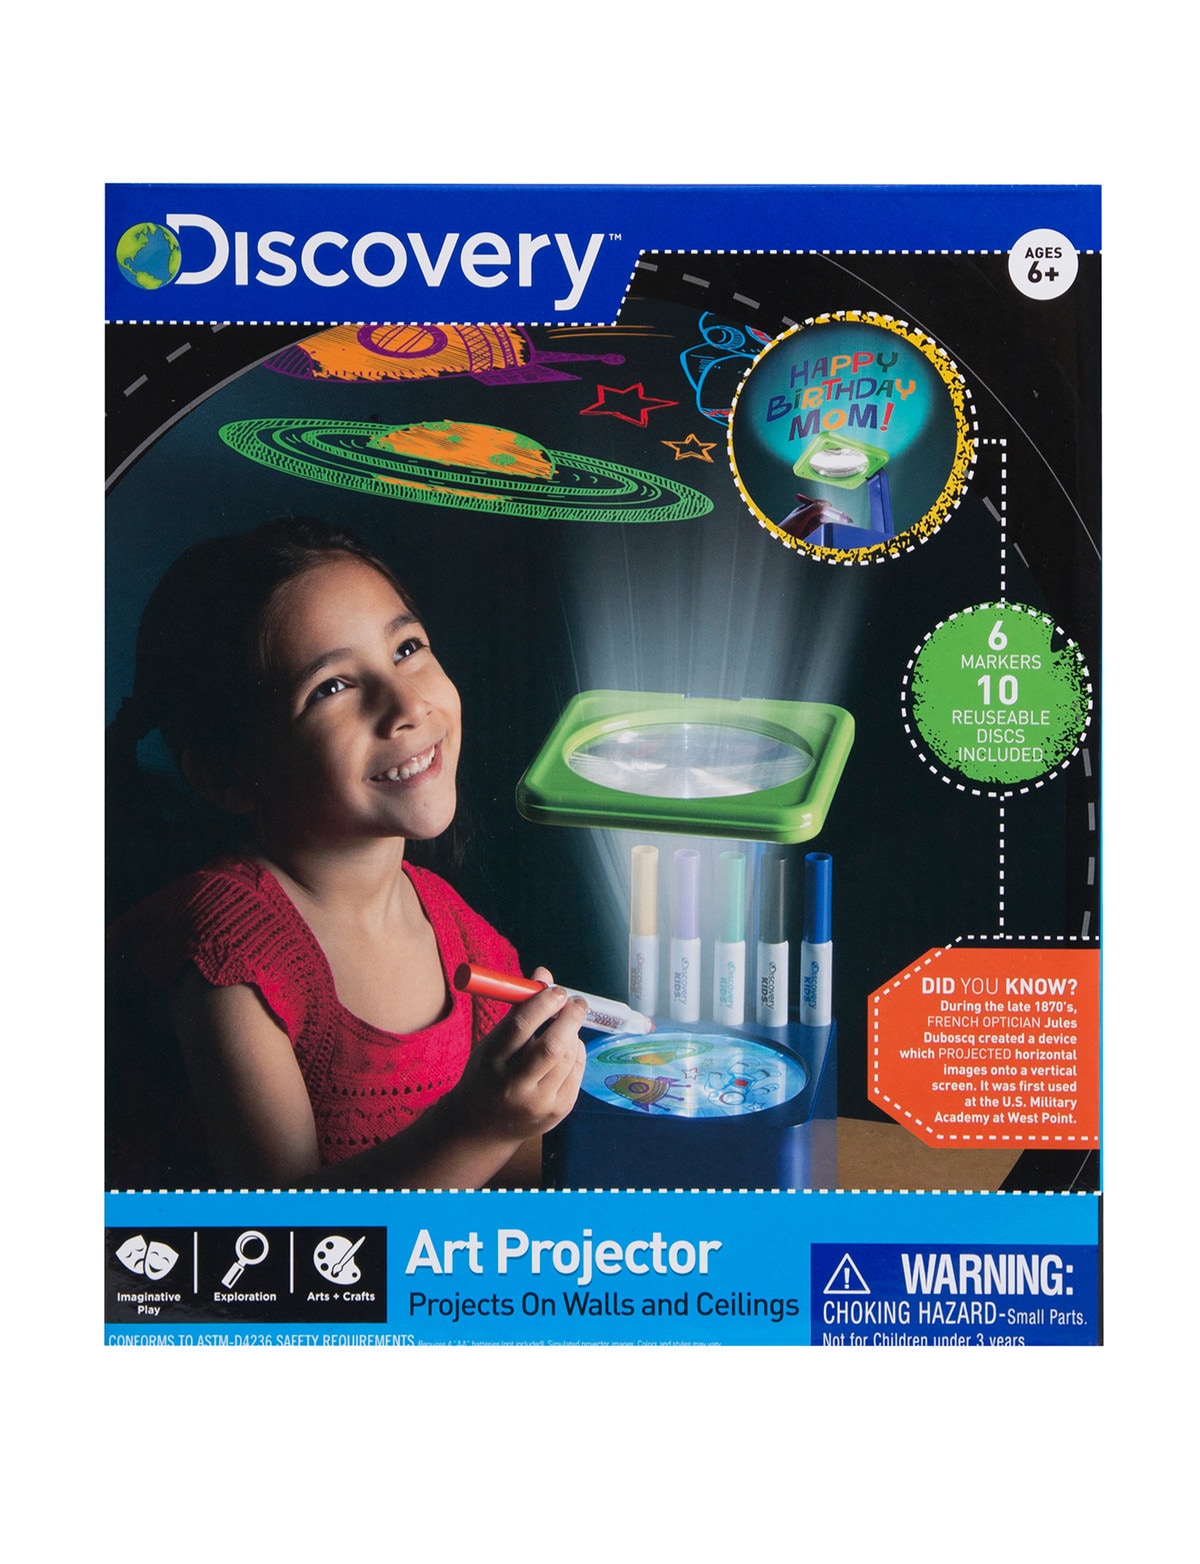 Discovery Art Projector, with 6 Colour Markers - Arts & Crafts